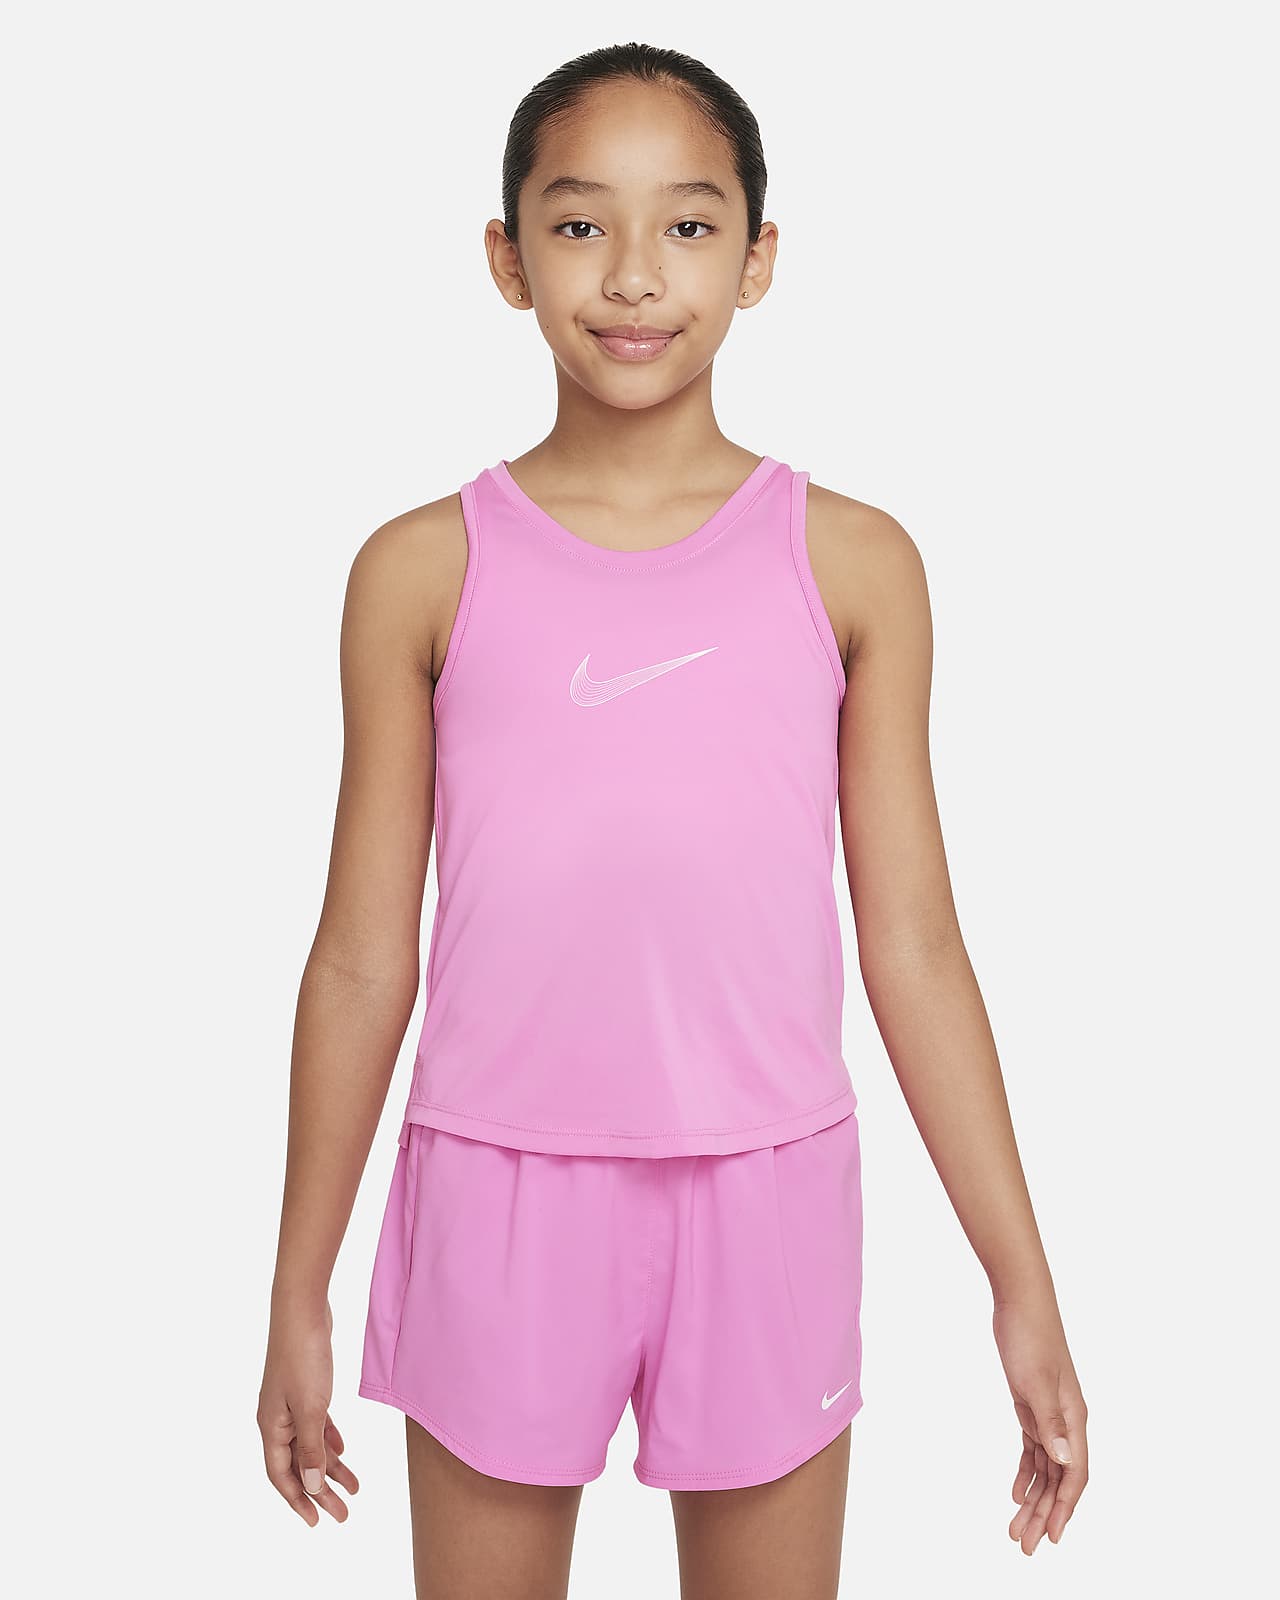 Check Out the Best Women's Workout Tank Tops by Nike. Nike NL